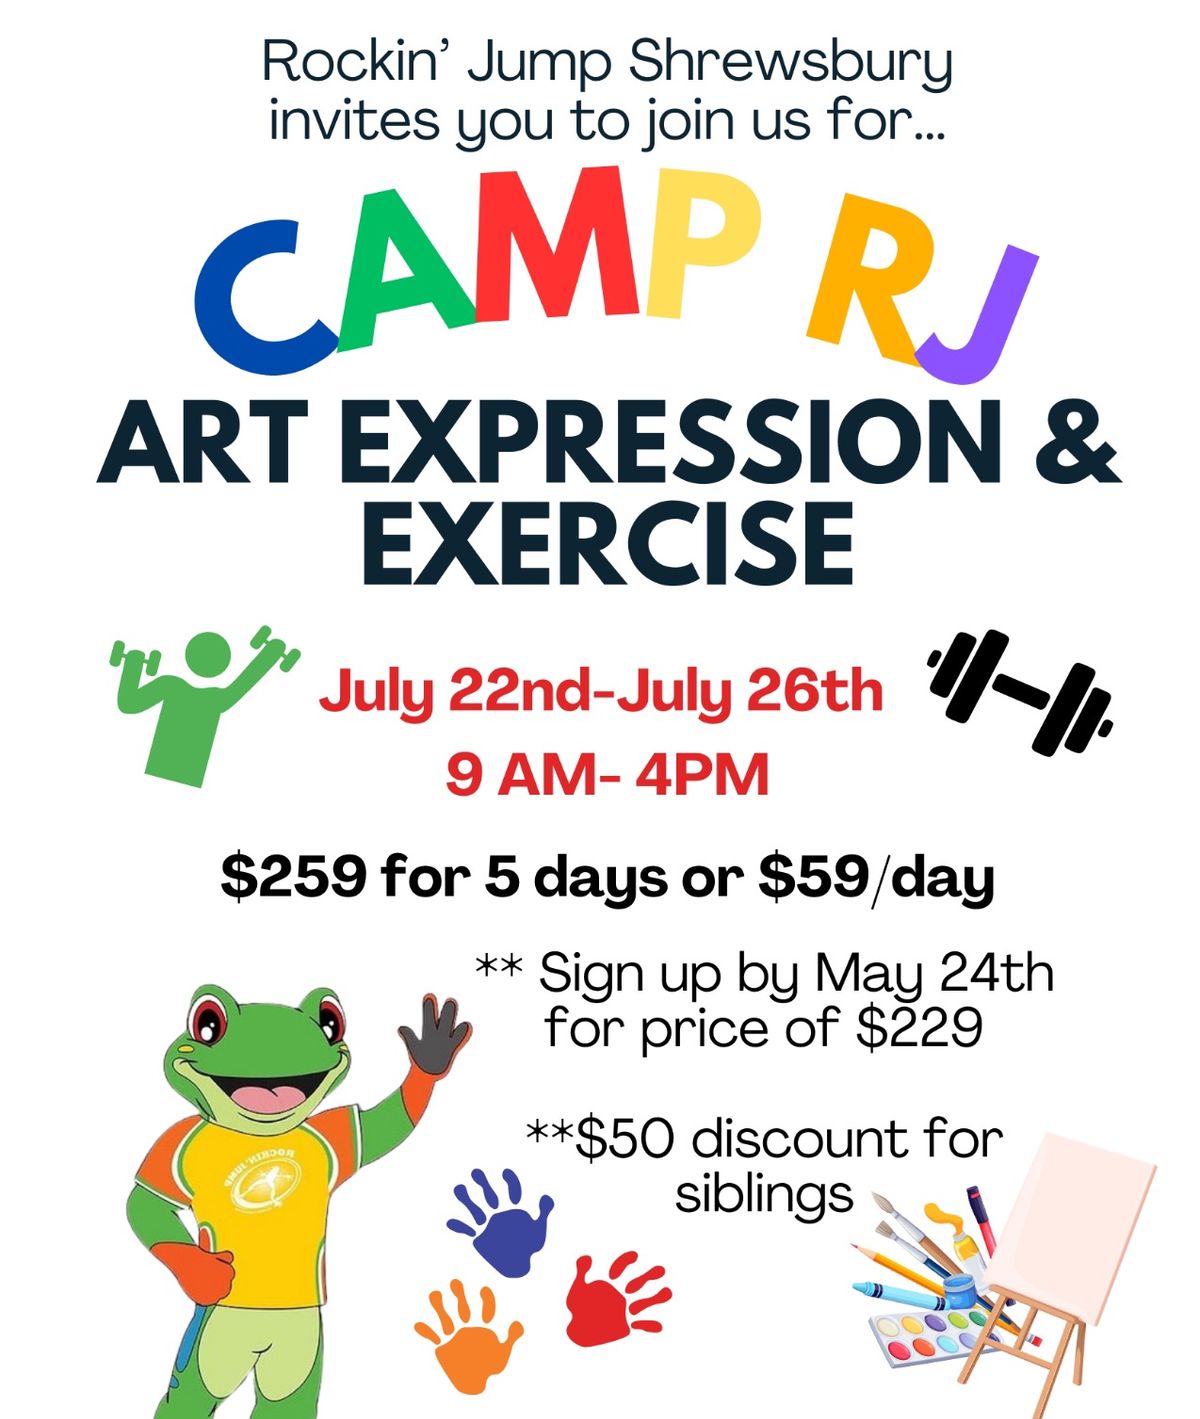 Camp RJ - Sign Up Now